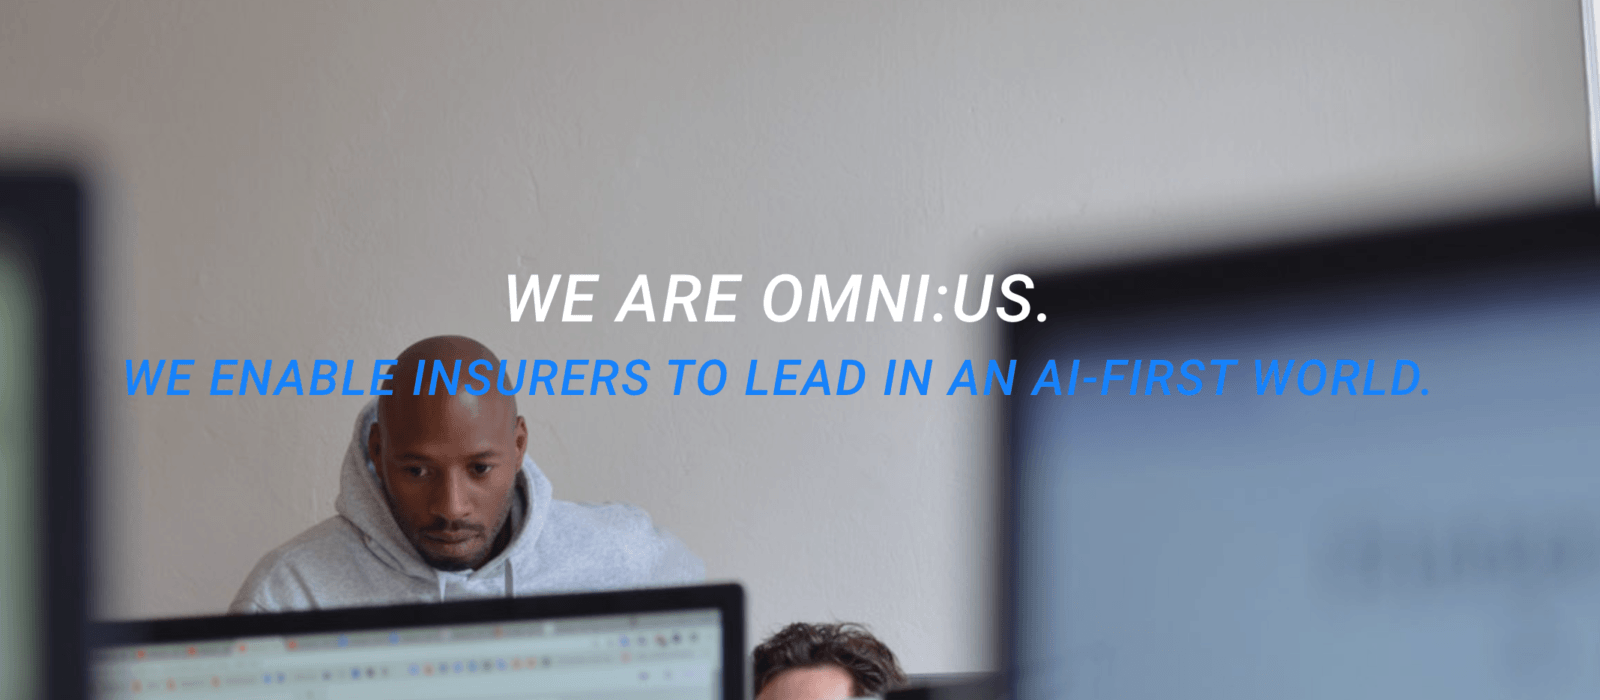 Insurtech startup omni:us gets €1.6 million from the EU for its AI-driven claims platform – an interview with CEO Sofie Quidenus-Wahlforss